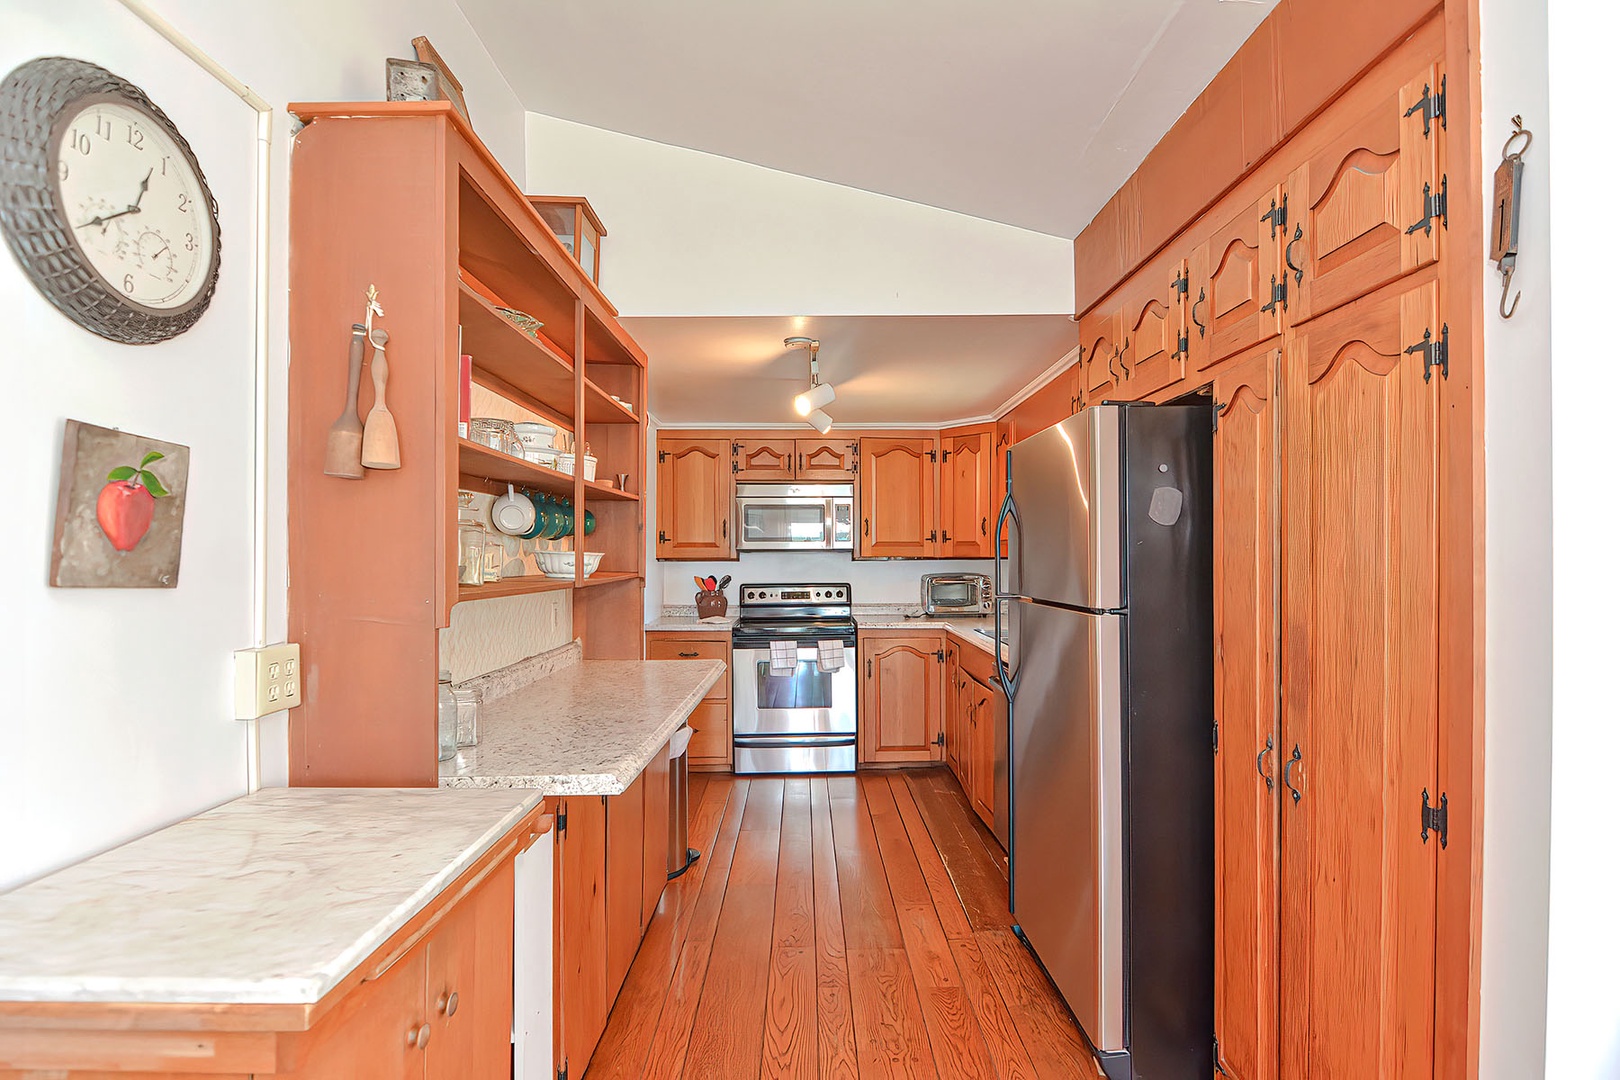 The kitchen, with pine cabinetry.